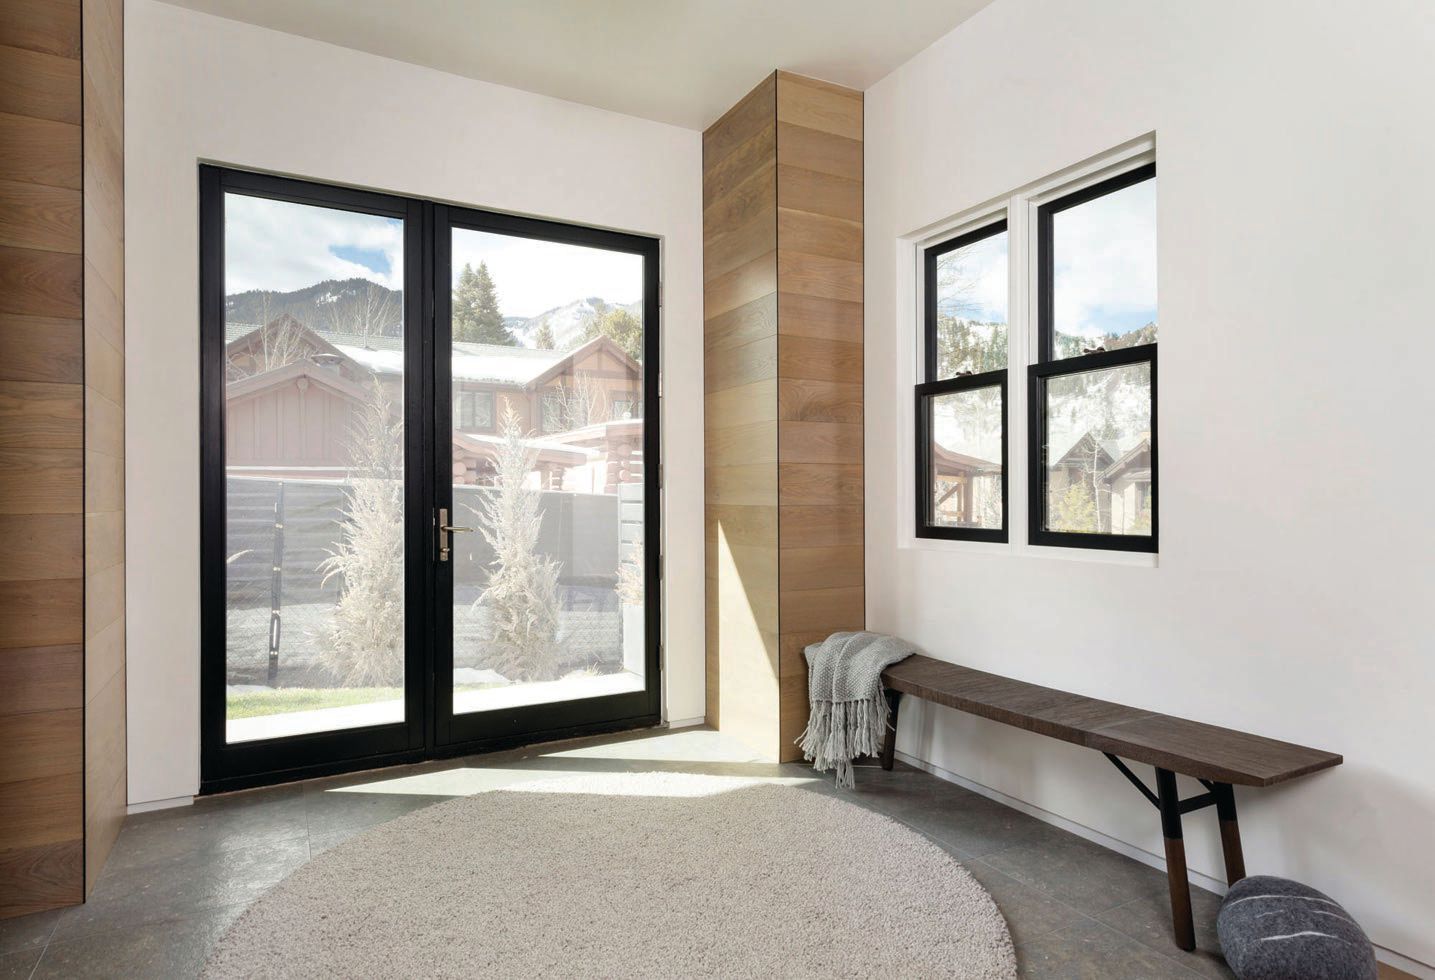 Made completely of glass, the door allows the light to flow into the space. PHOTO COURTESY OF KAREN WHITE INTERIOR DESIGN